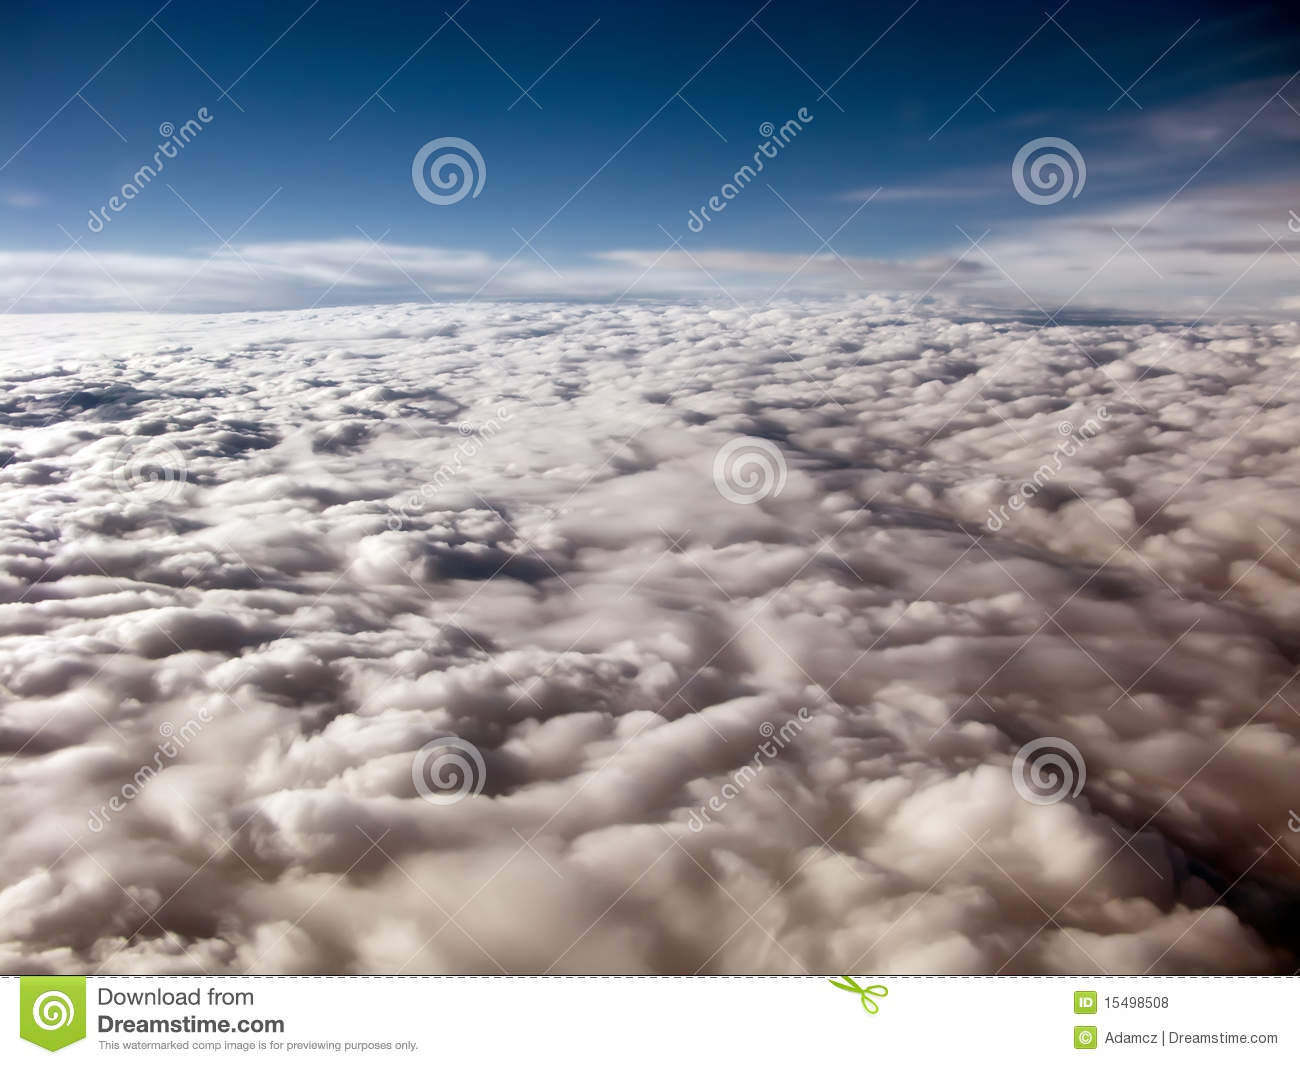 Heavenly Clouds Royalty Free Stock Photos   Image  15498508